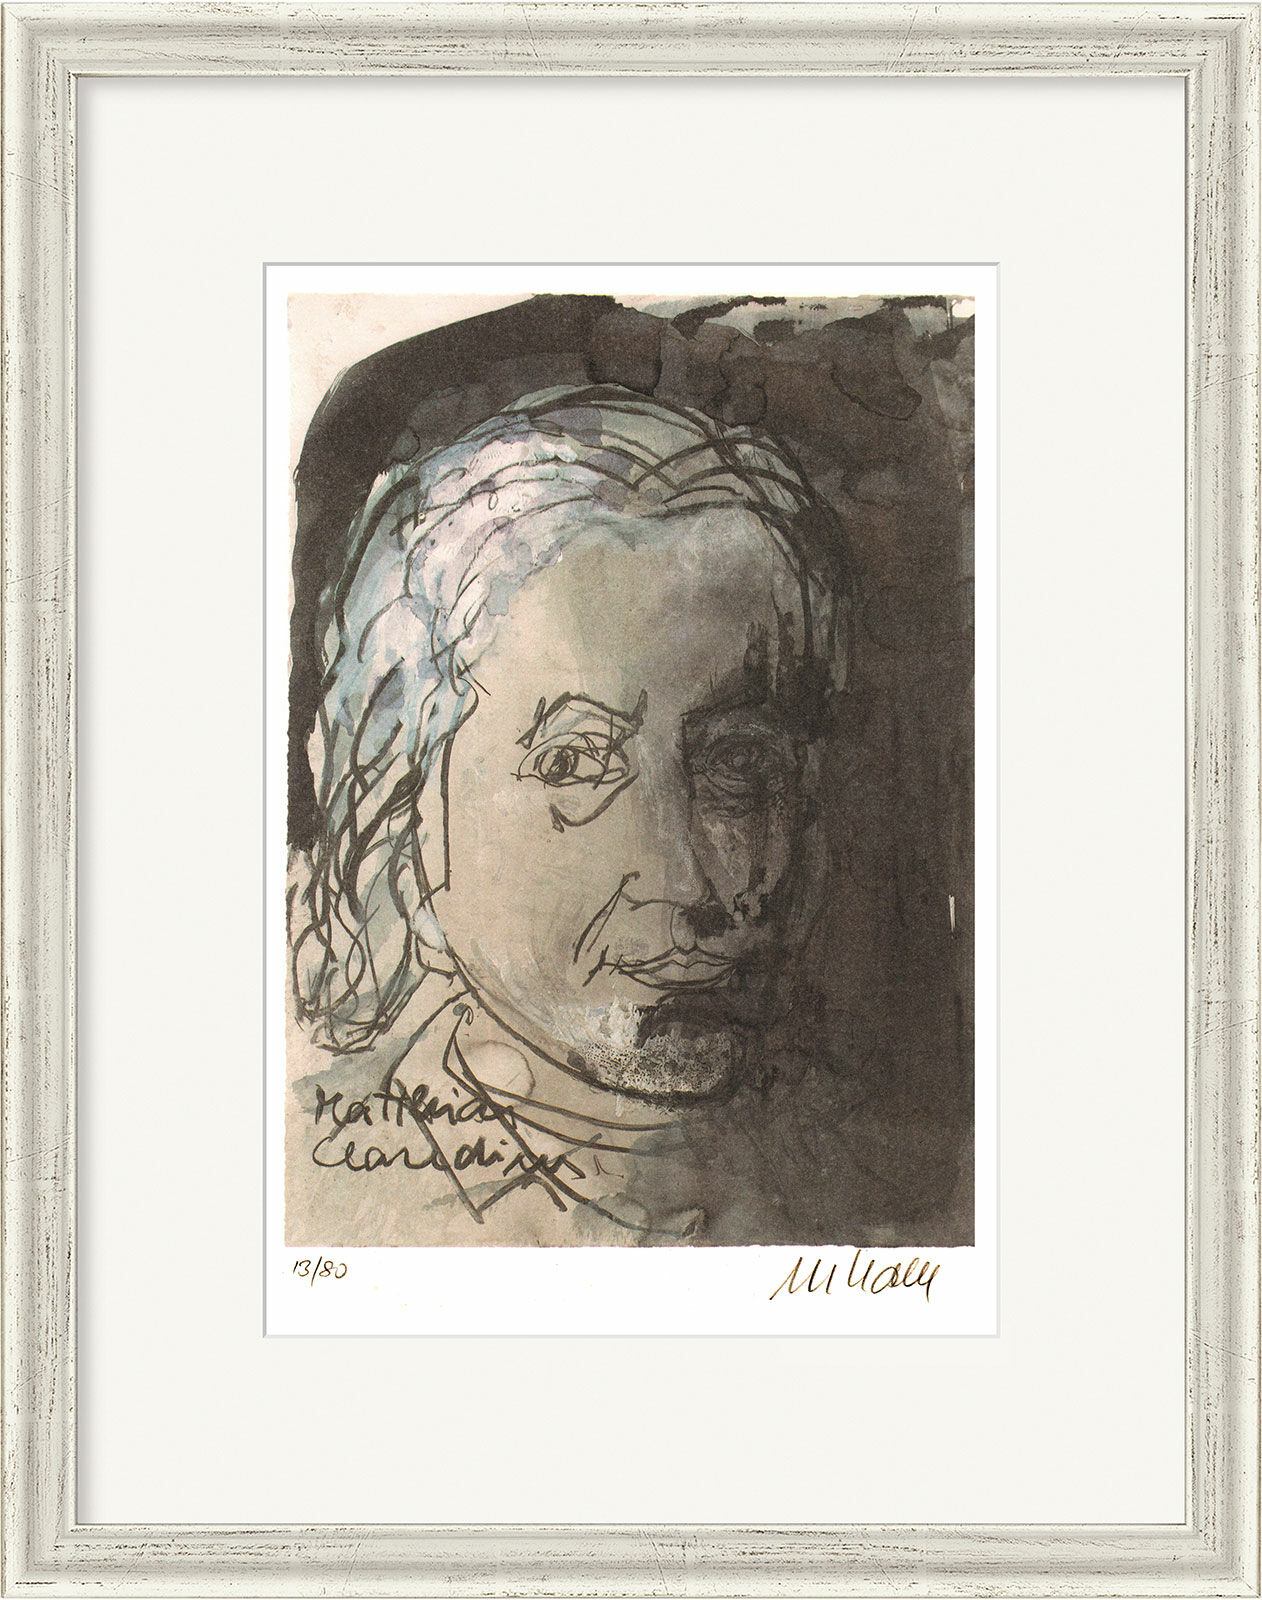 Picture "Matthias Claudius" (2015), framed by Armin Mueller-Stahl